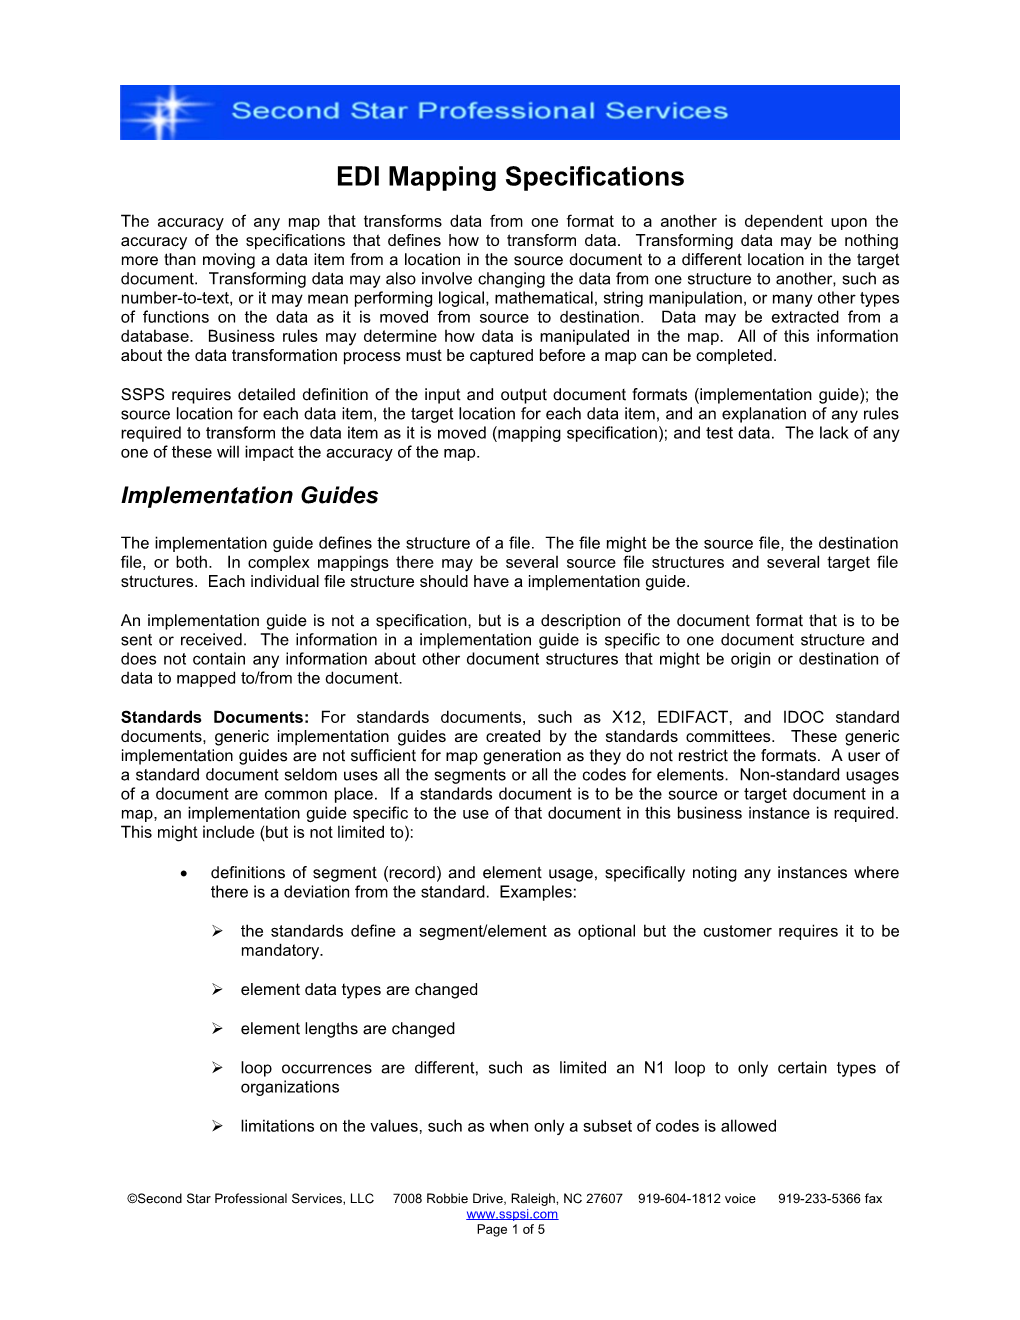 EDI Mapping Specifications